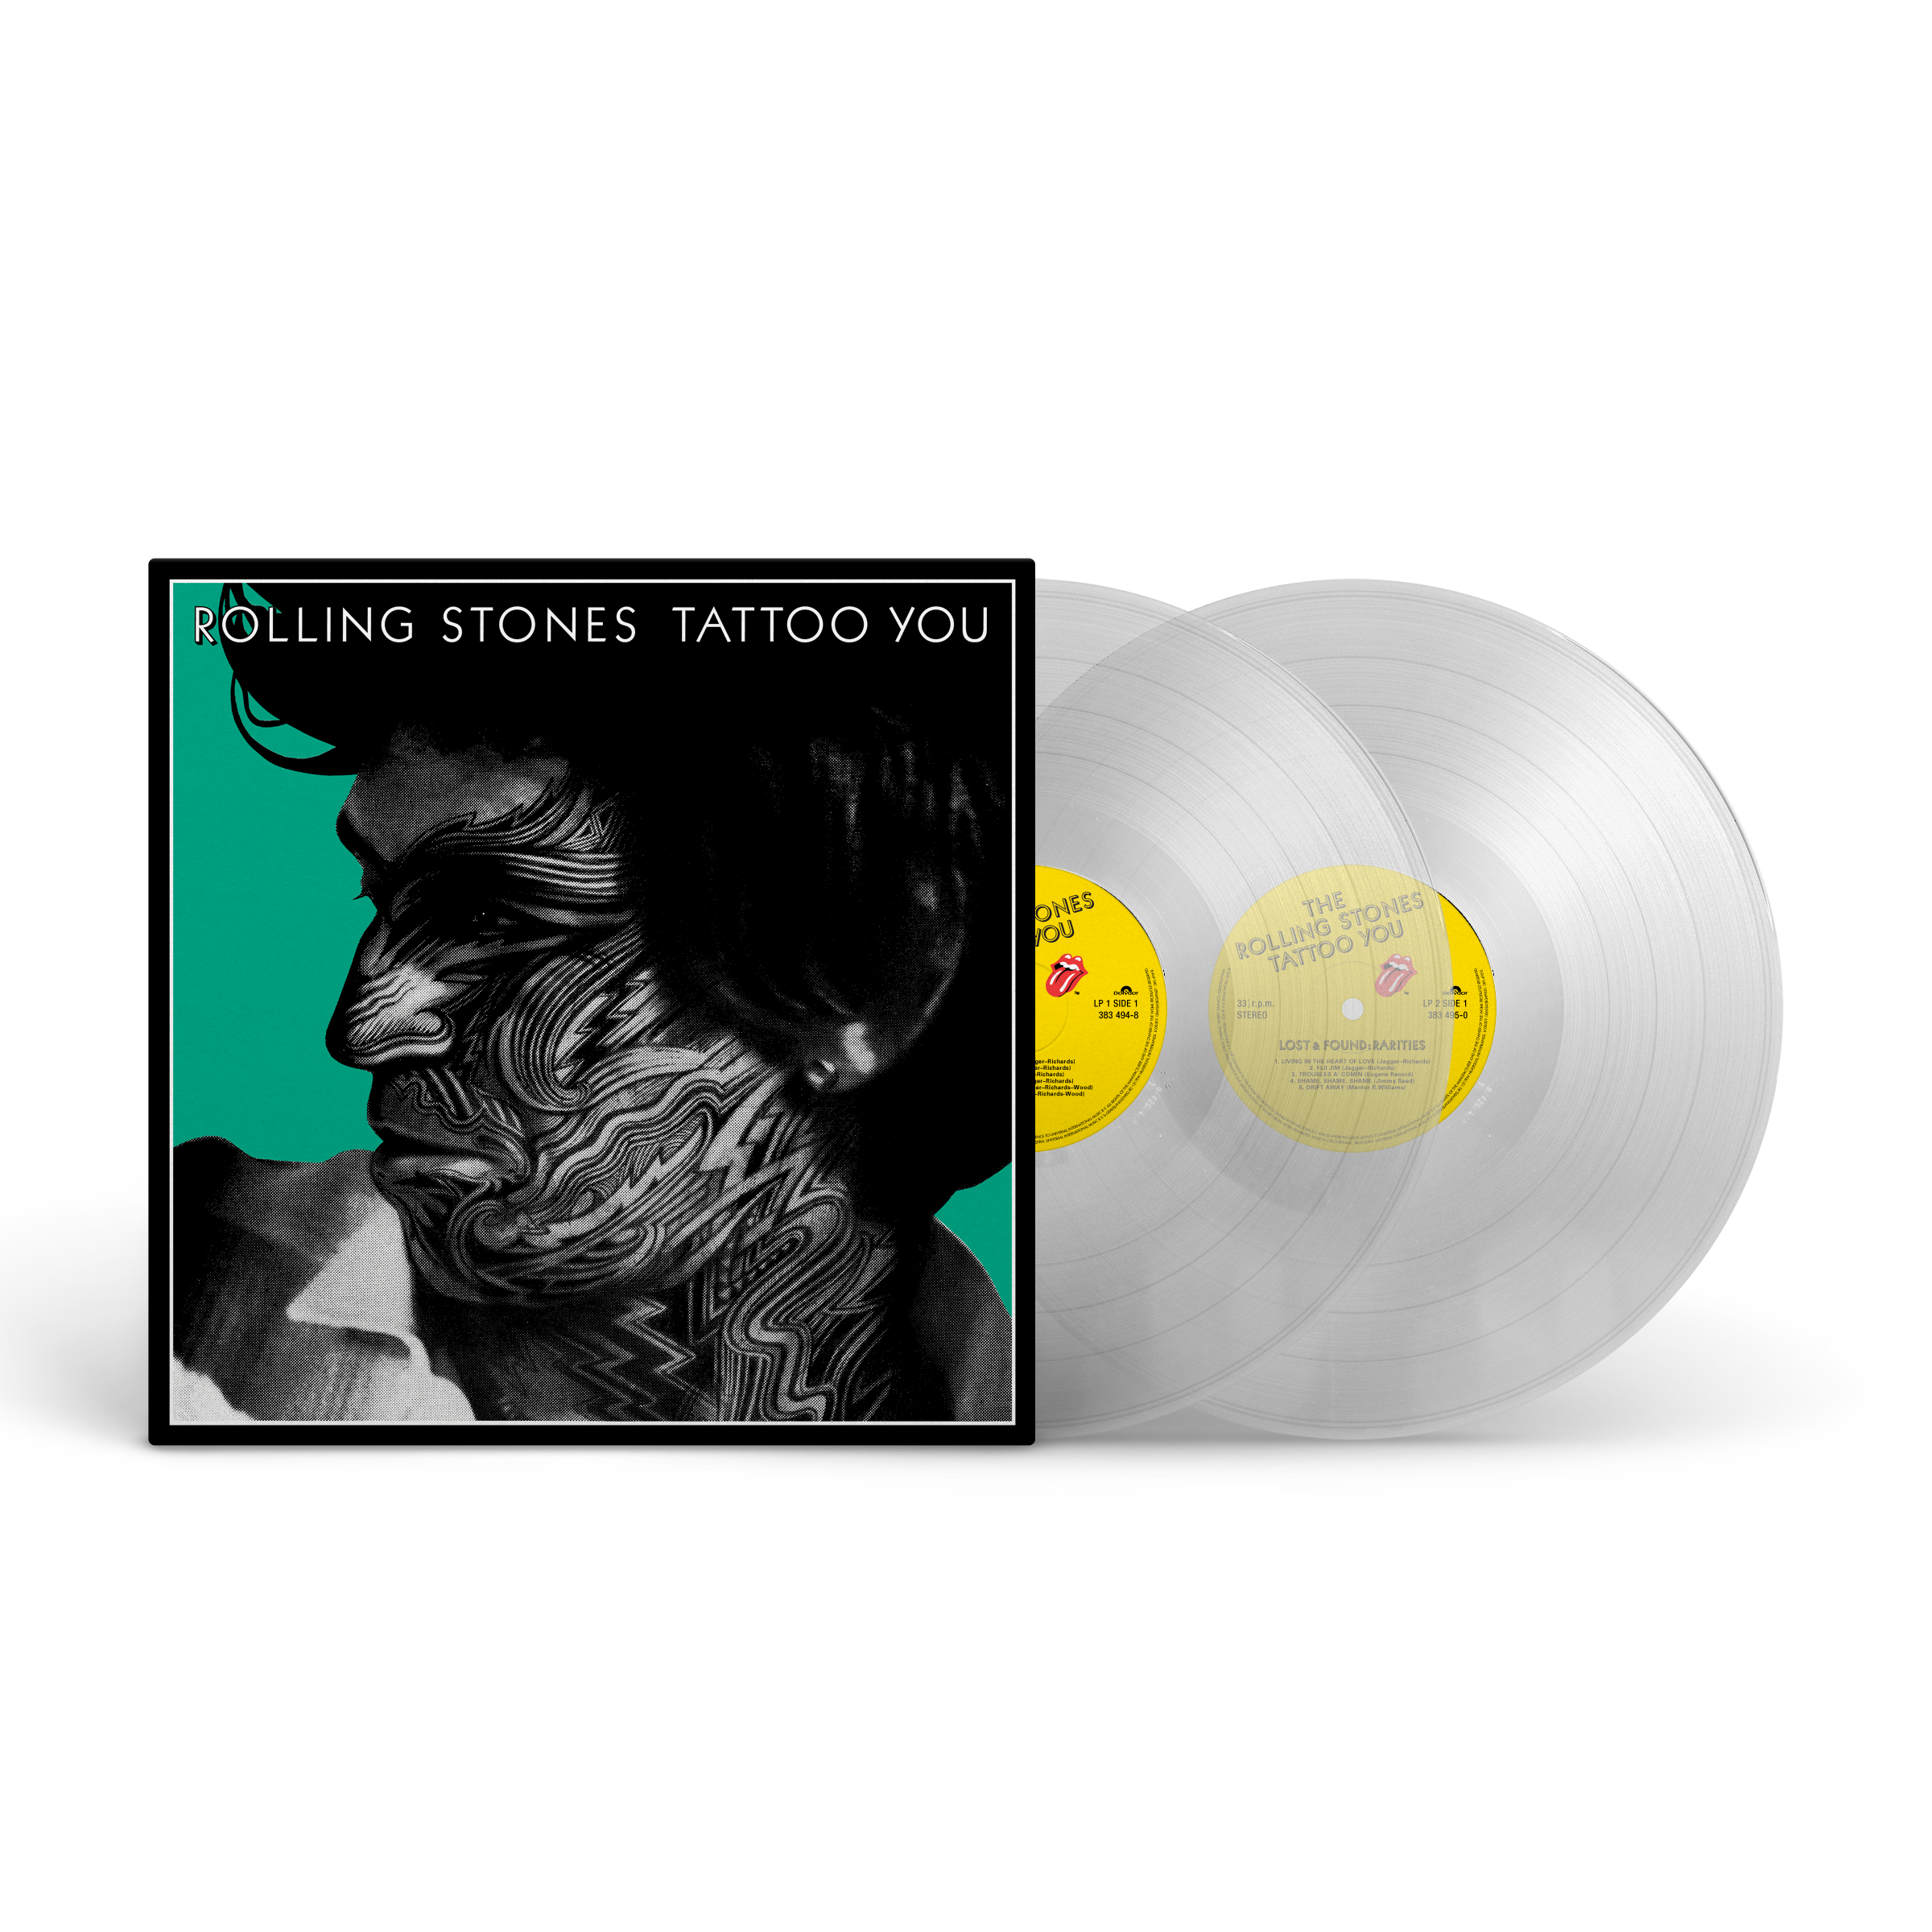 The Rolling Stones - Tattoo You (40th Anniversary Remaster): Exclusive Deluxe Clear Vinyl 2LP